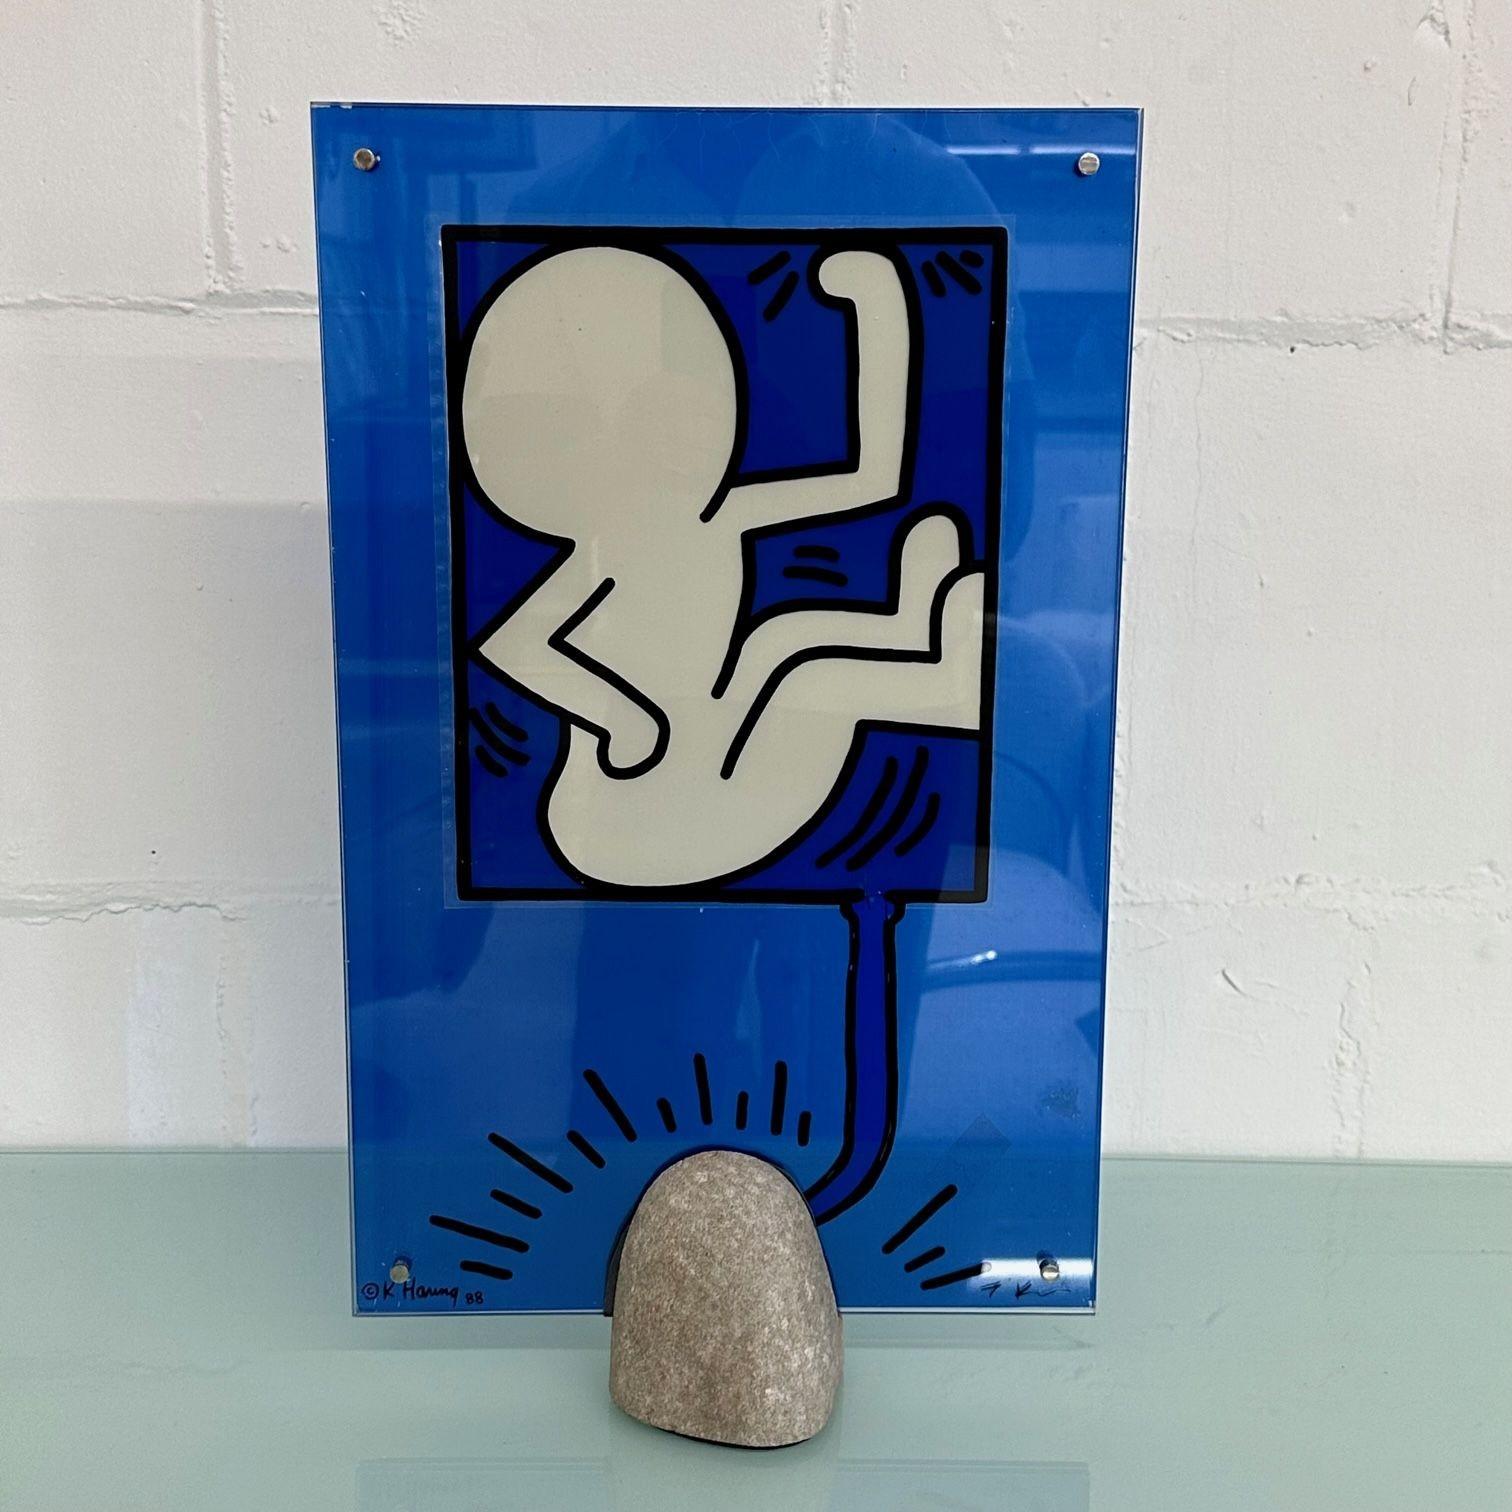 Mid-Century Modern Keith Haring Sculpture / Lamp, Glass and Stone, Signed, 1988

Limited edition Keith Haring and Toshiyuki Kita lamp. Comprised of reverse screen printed glass and stone. Signed and dated on the lower left hand corner. Matching lamp